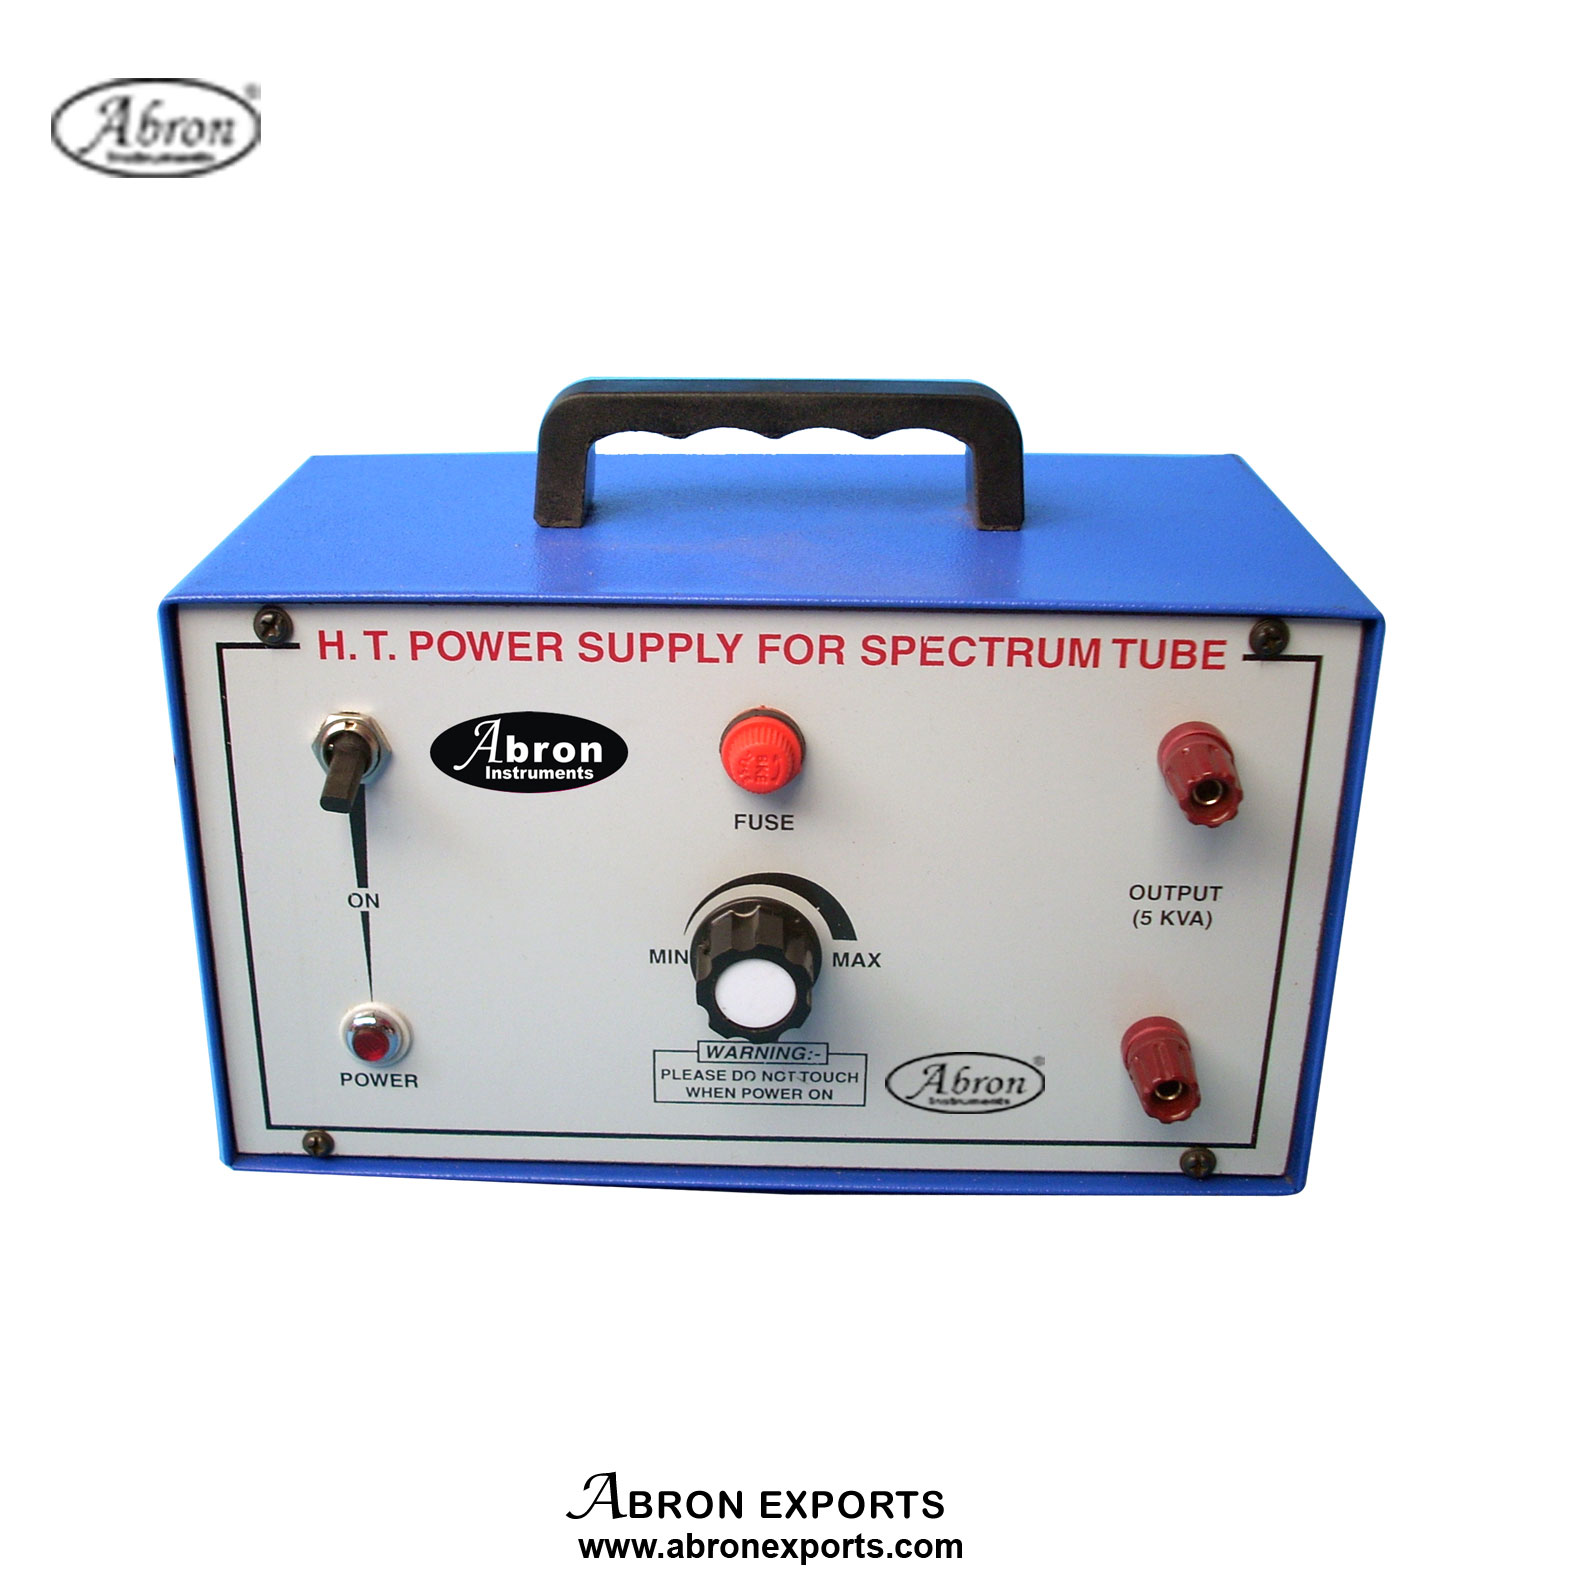 Power Supply HT High Voltage 5KVA for Gas Spectrum Tube with knob AE-1375HT